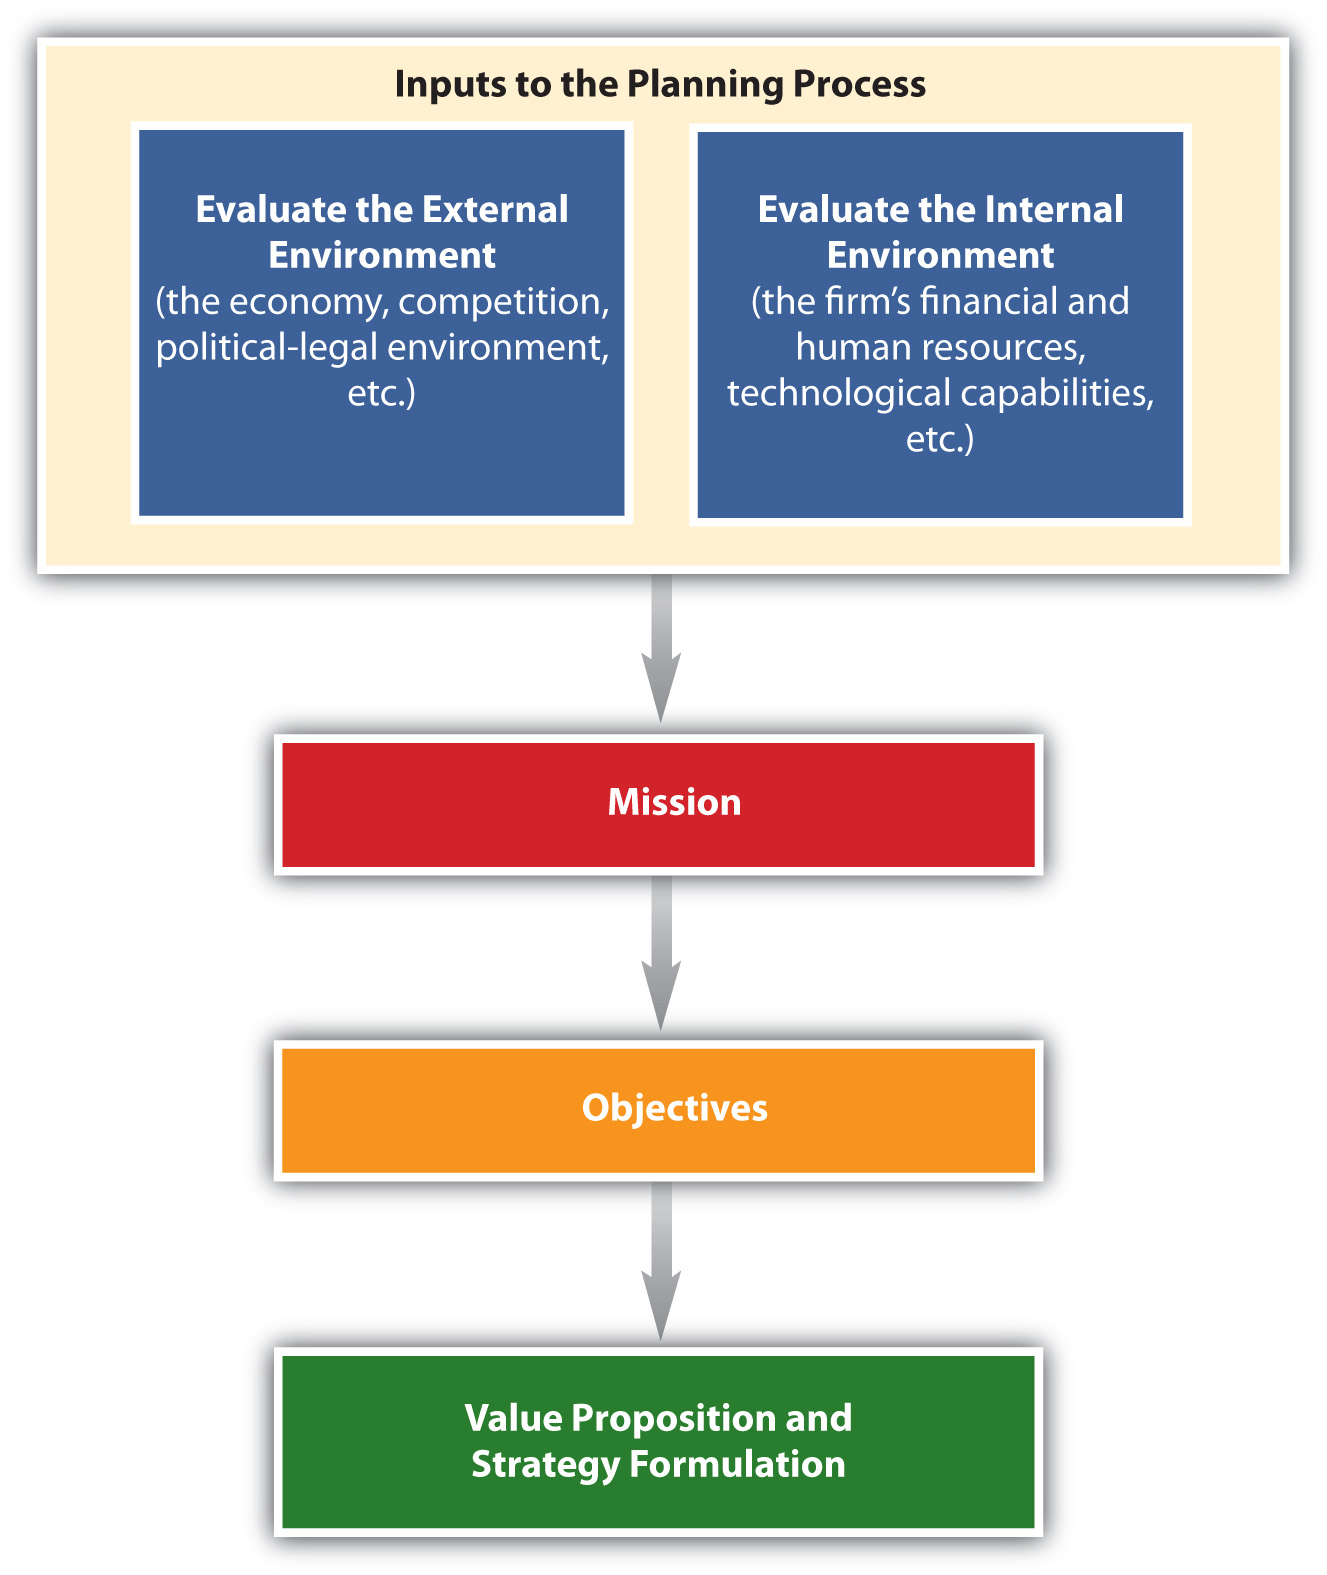 Inputs to the planning process (by evaluating the external and internal environment), then progressing to mission, objectives, and value proposition and strategy formulation.